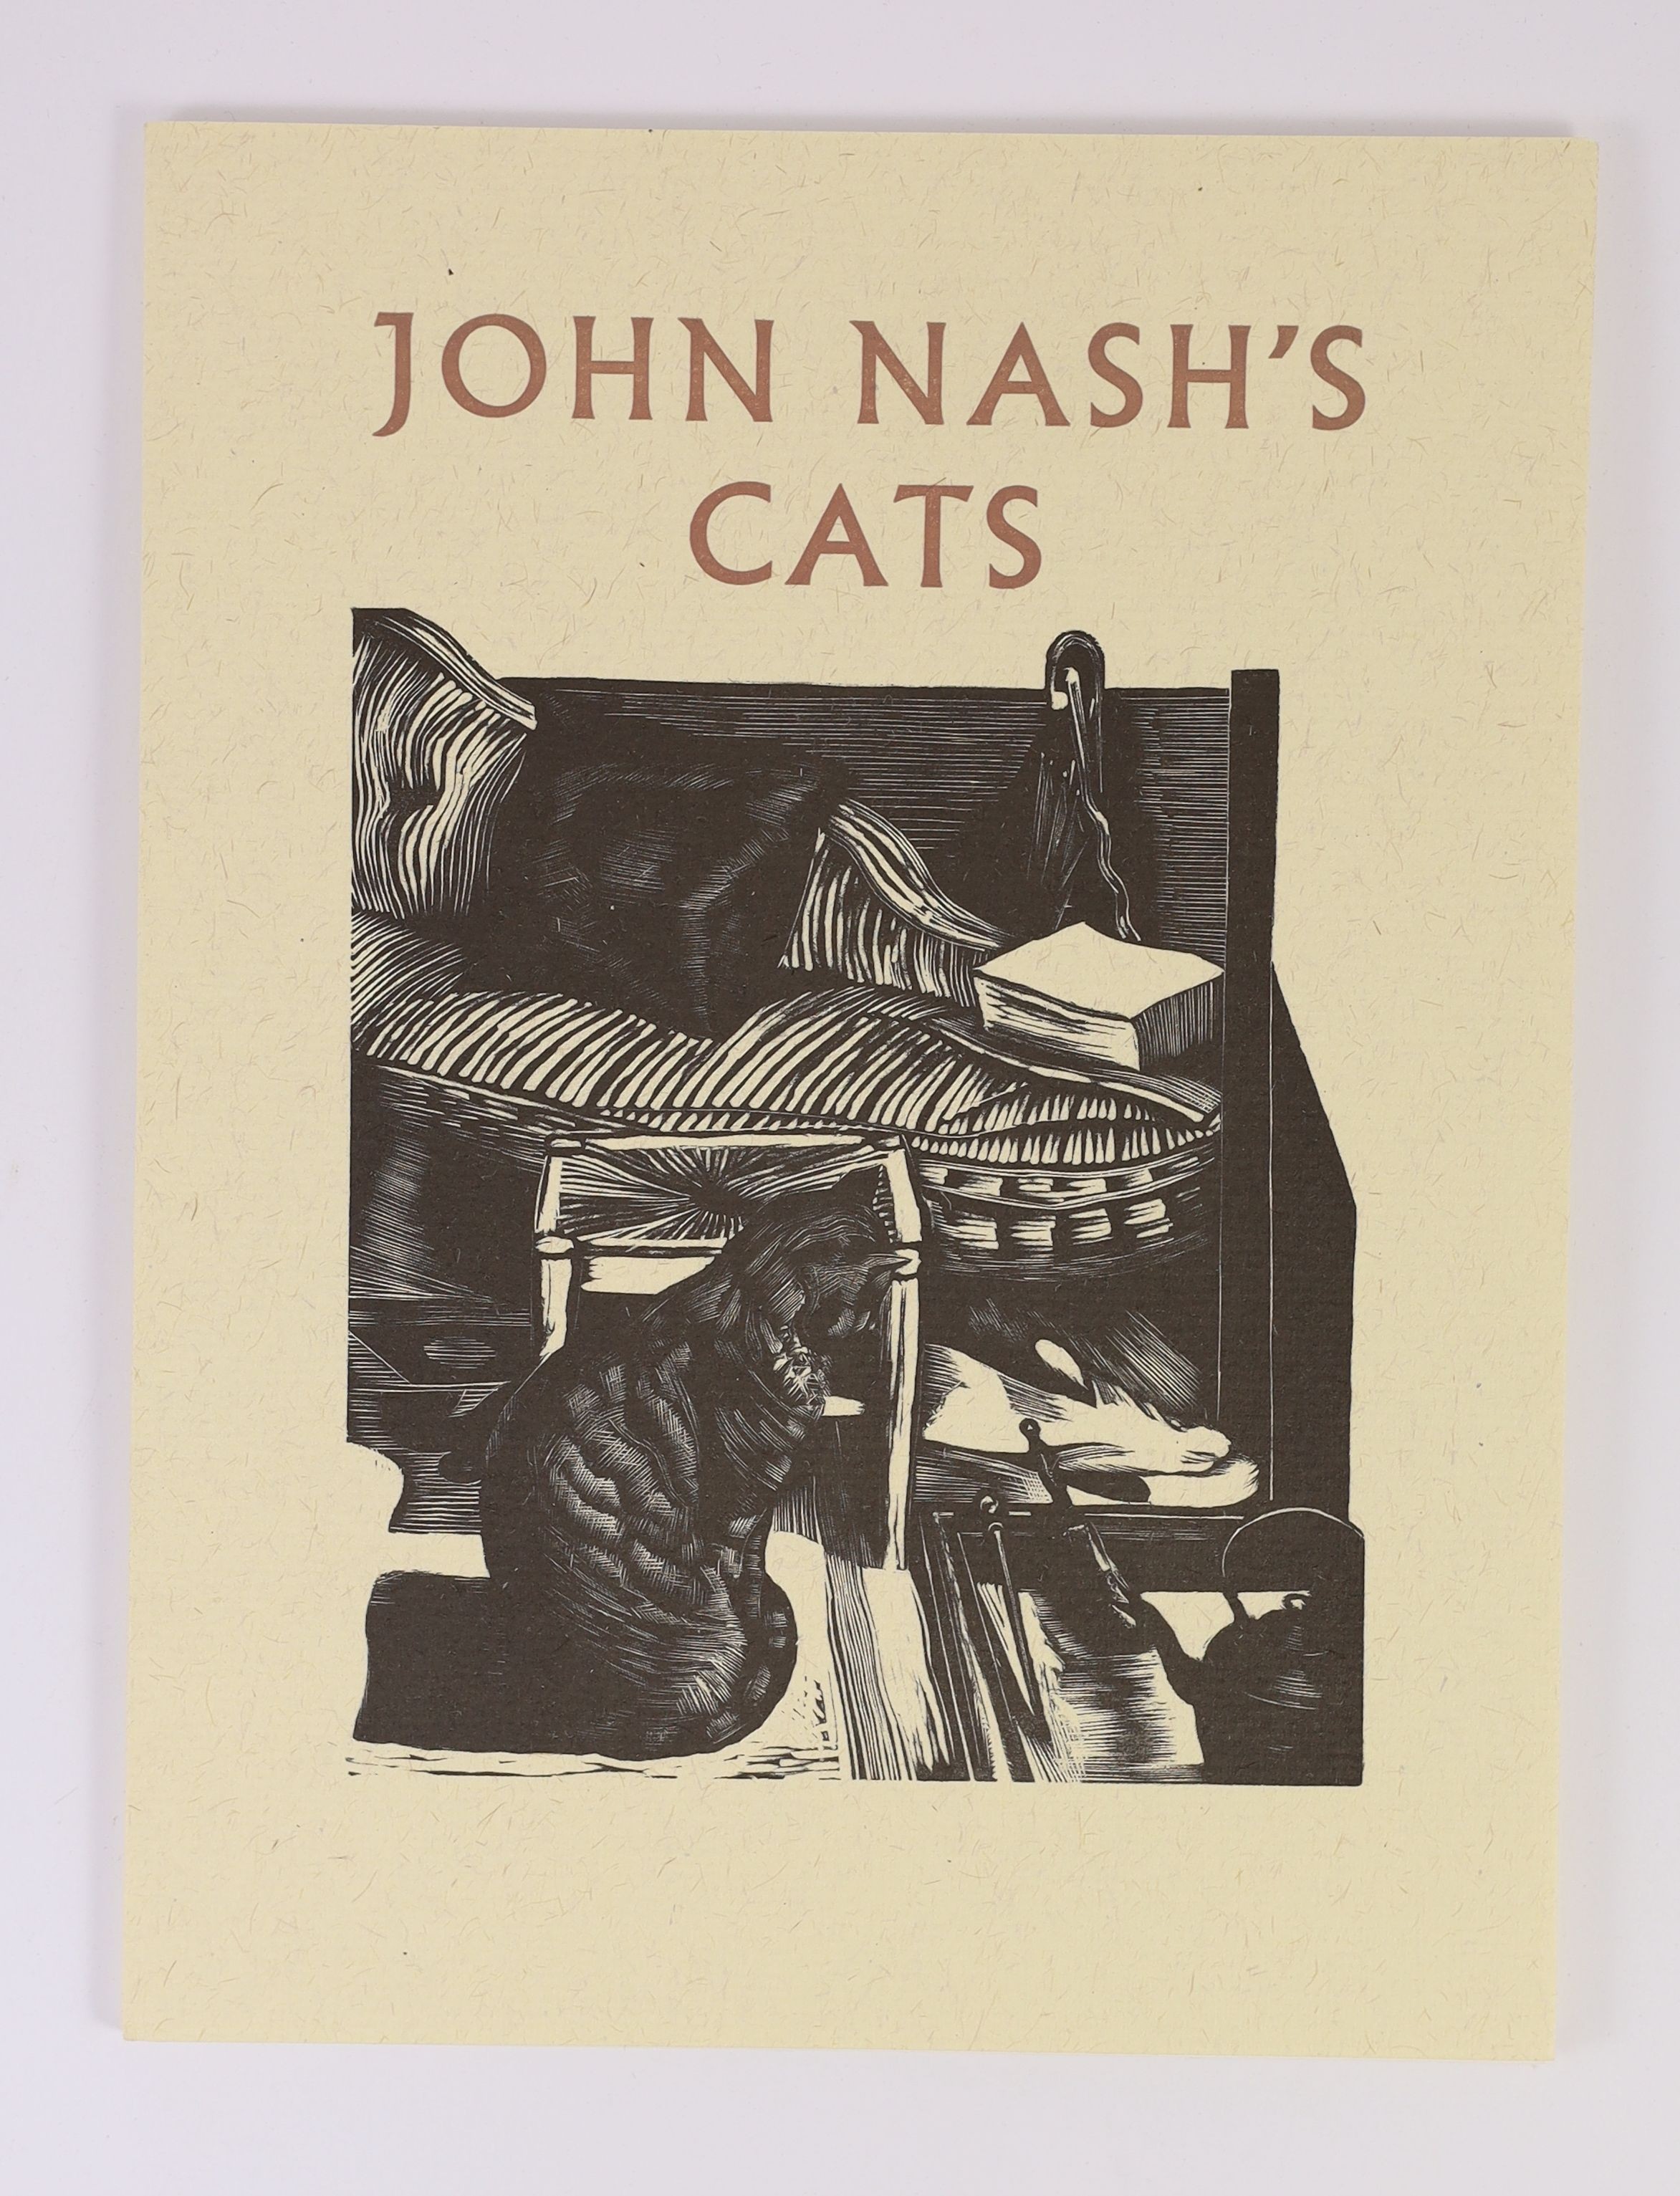 Blythe, Ronald - The Nash Cat’s Story [John Nash’s Cats]. 1st limited to 350 copies. Complete with 6 wood cut engravings and two text illustrations by John Nash. Pictorial paper cover with title to upper. Fore edge and t